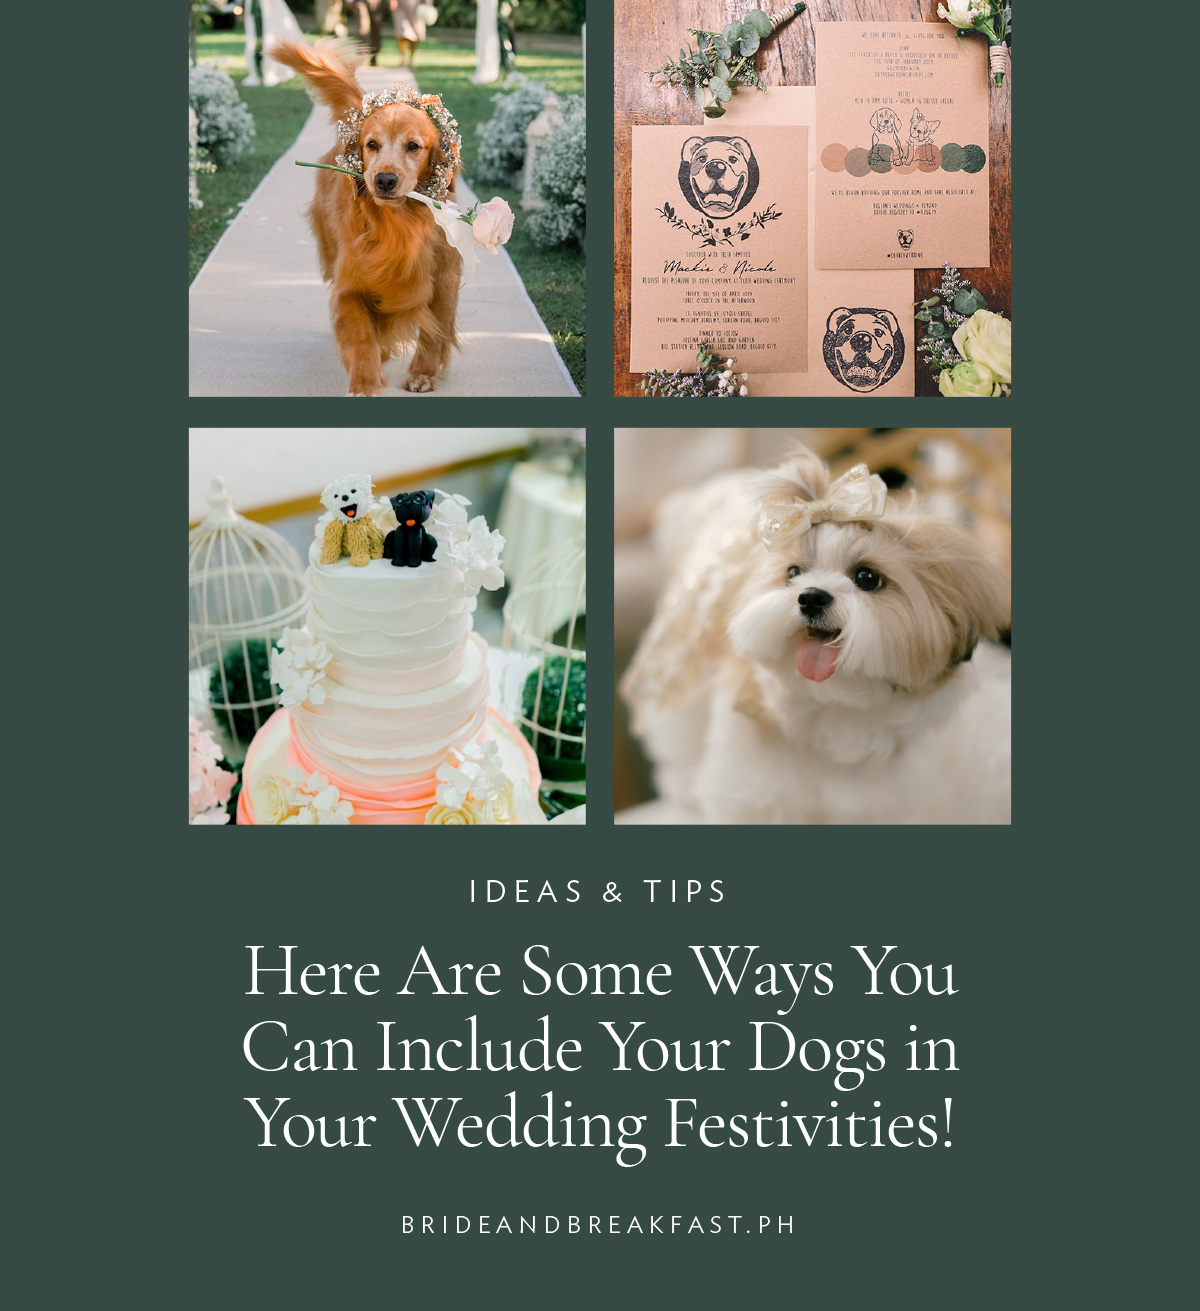 Here Are Some Ways You Can Include Your Dogs in Your Wedding Festivities!